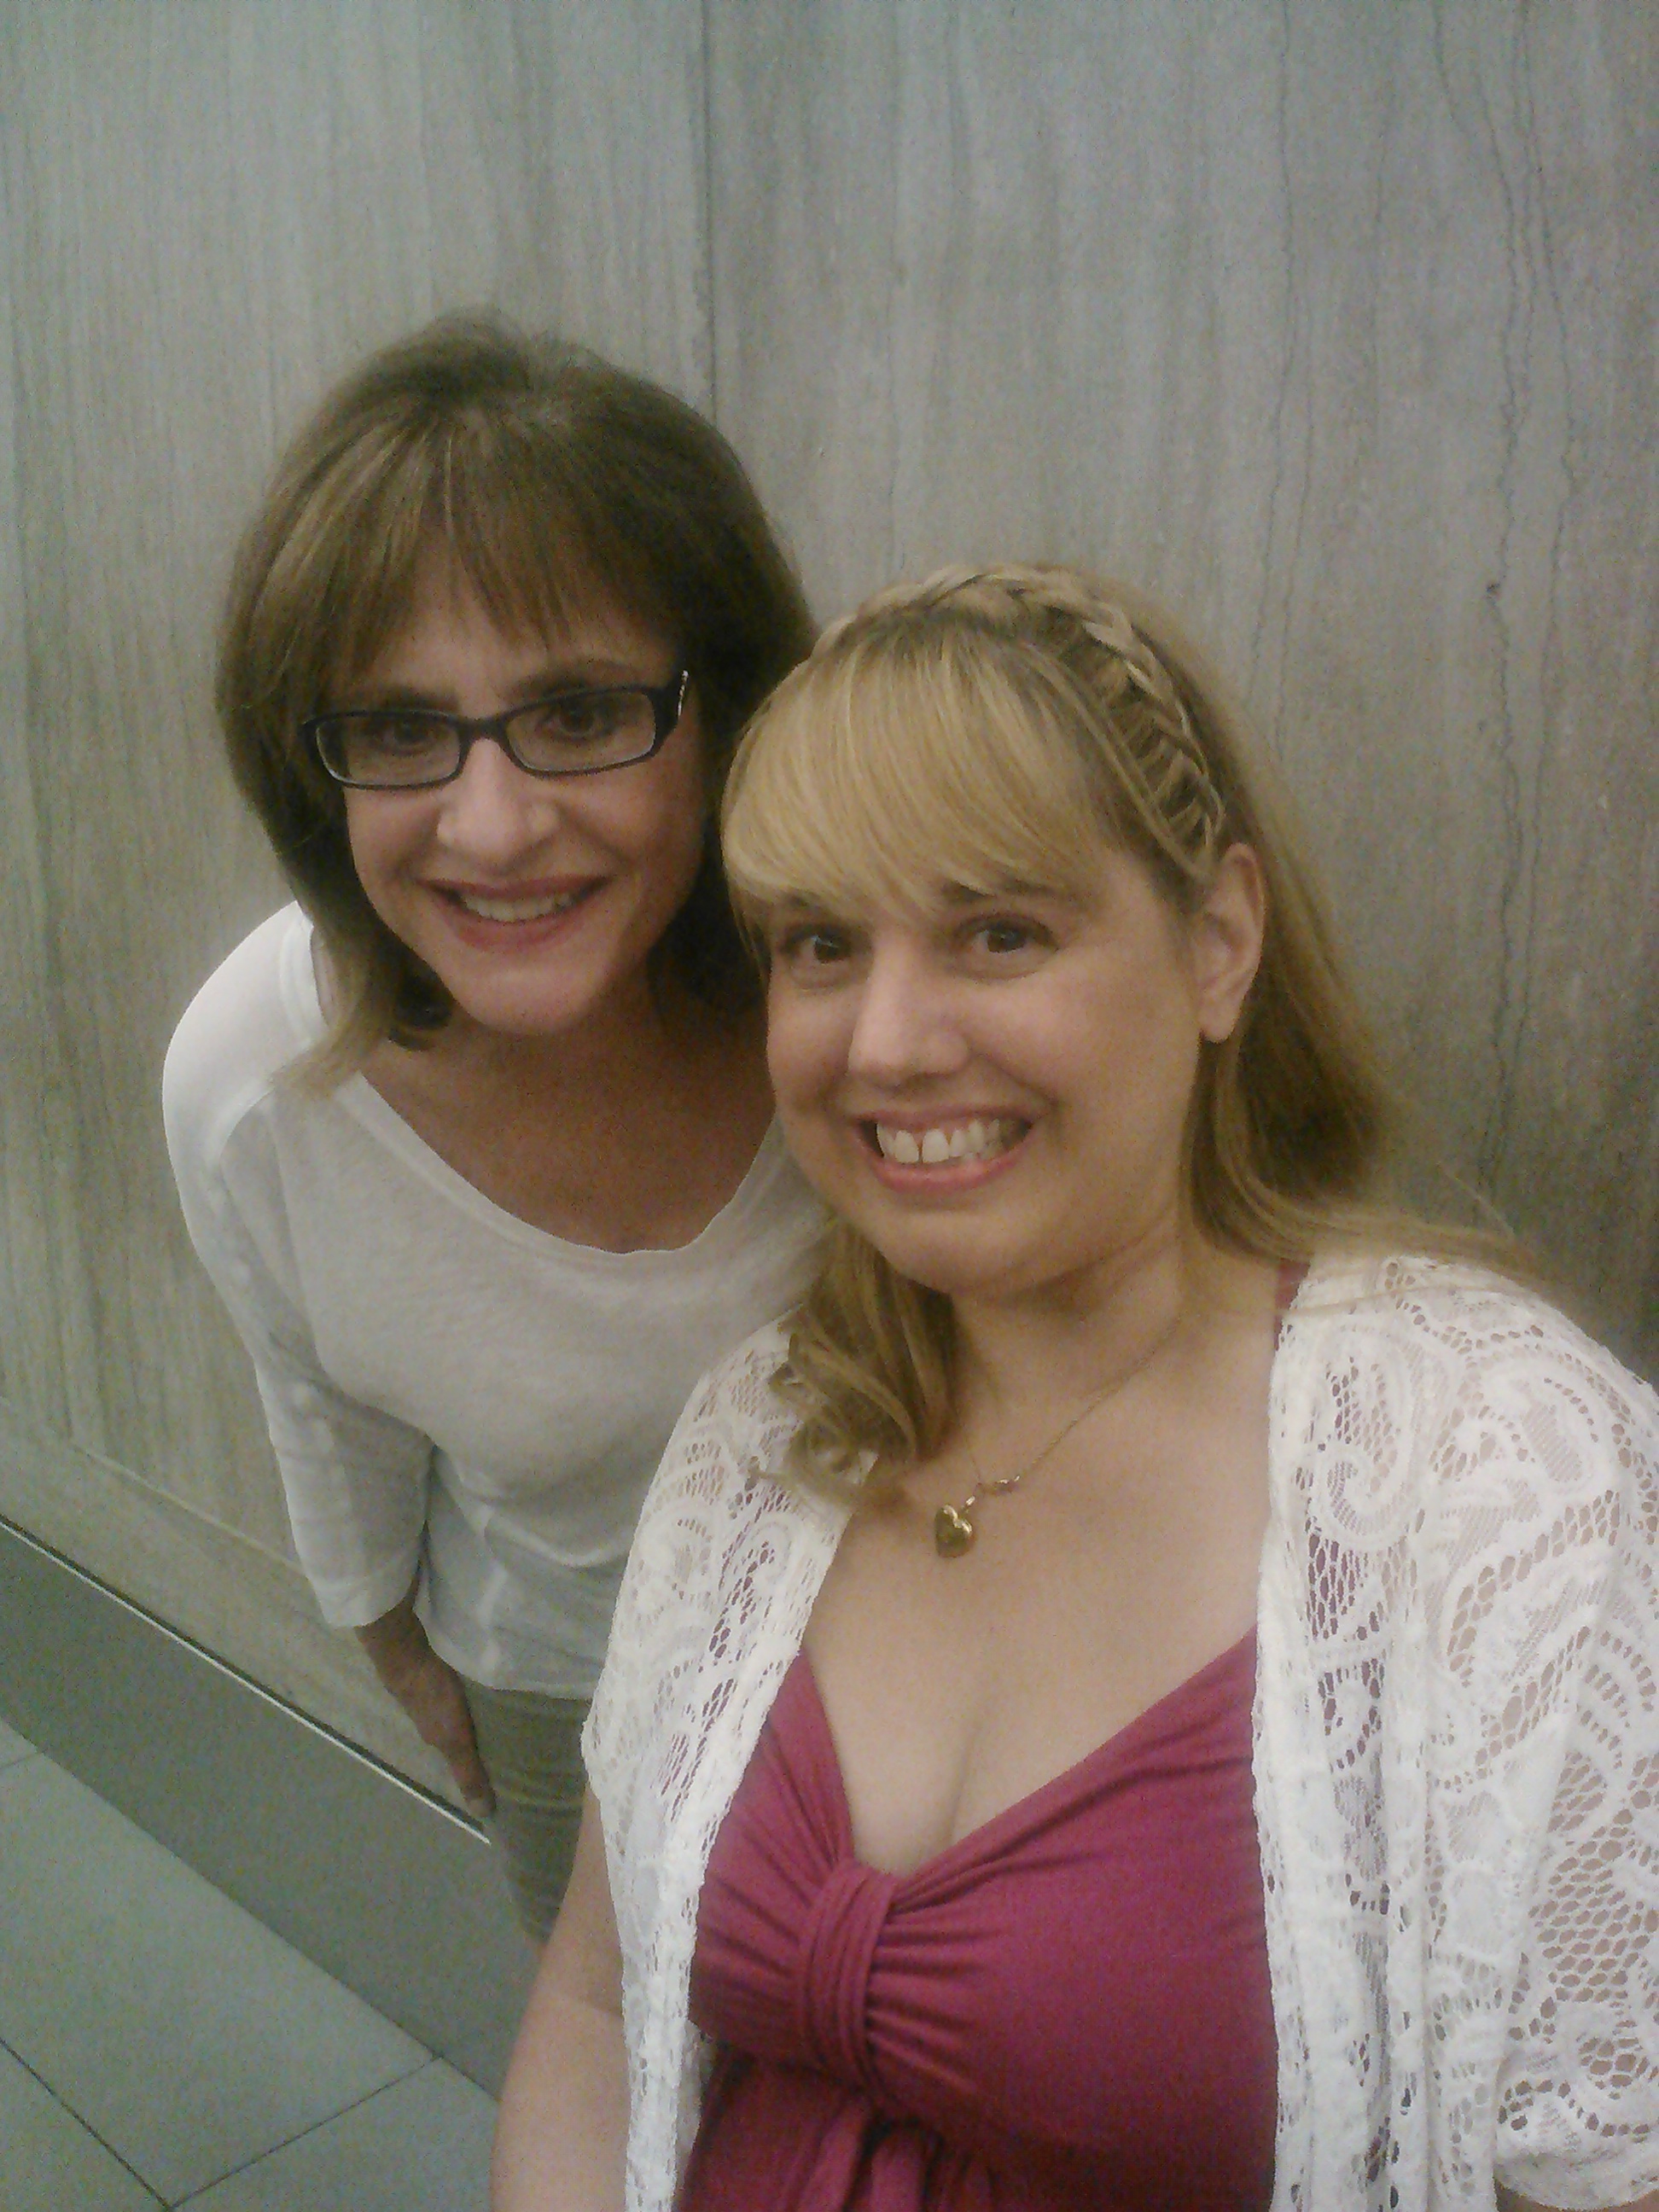 Patti LuPone & Gina Marie backstage in NY